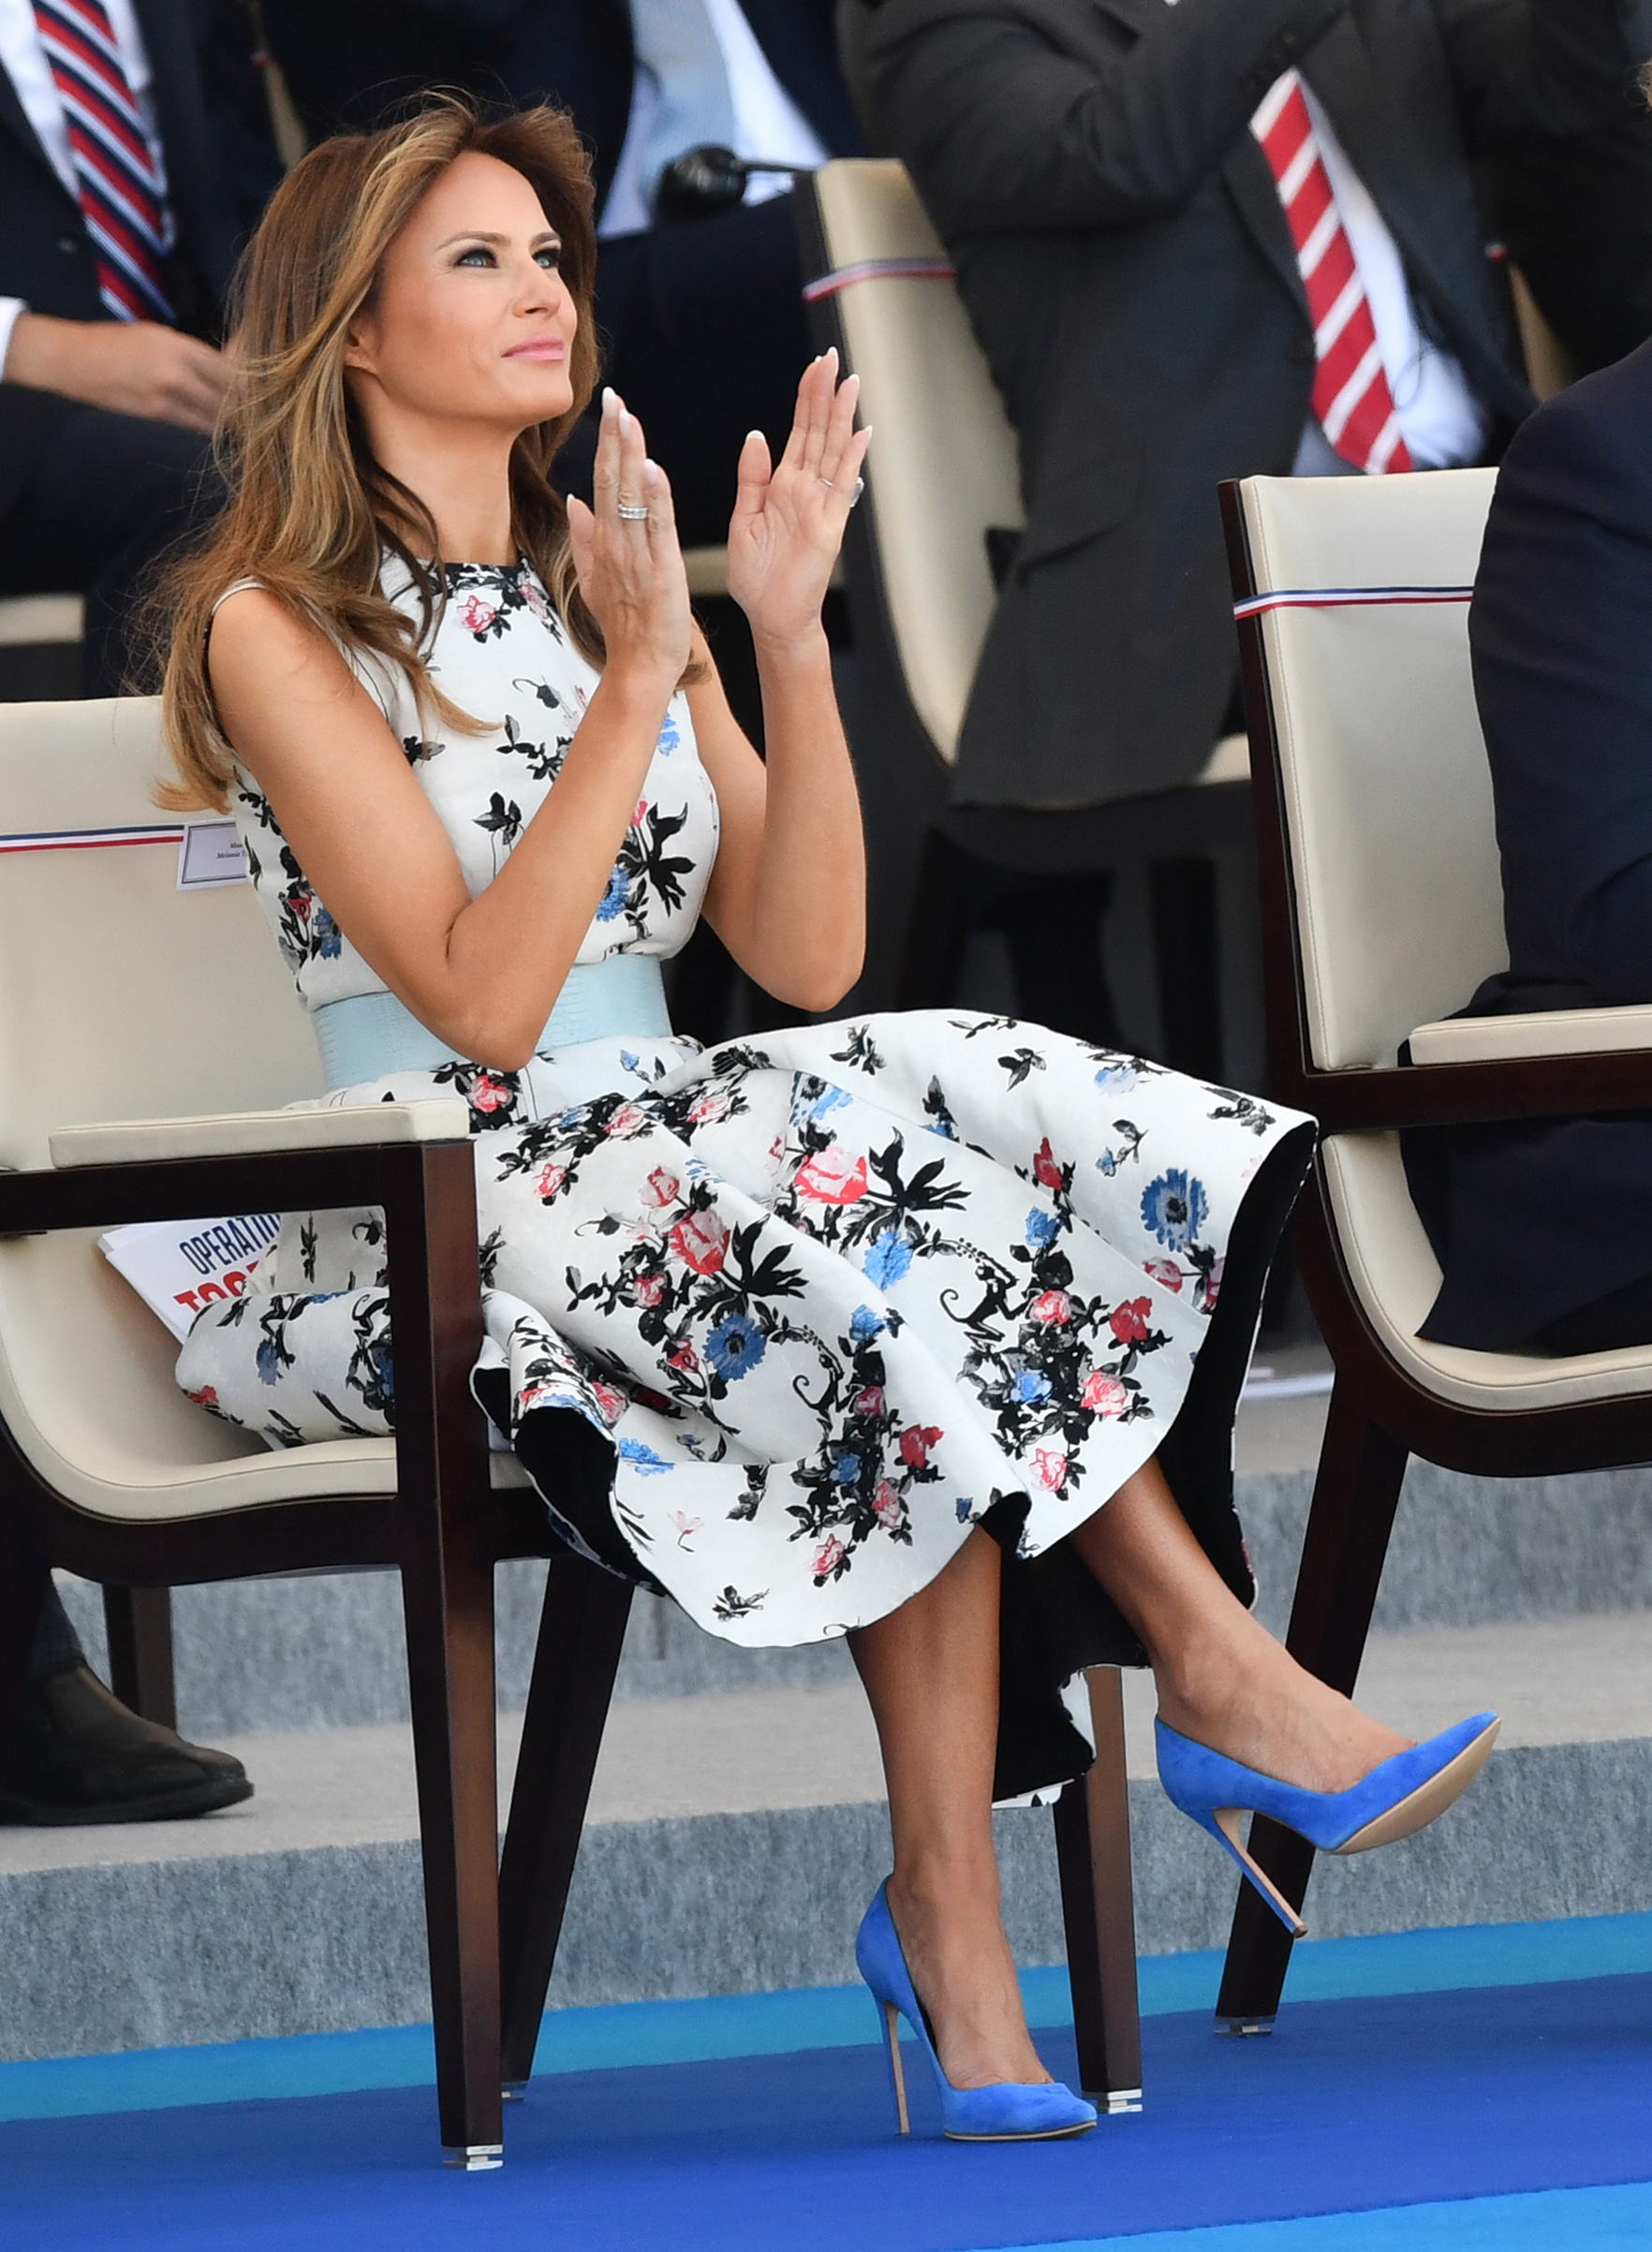 First lady Melania Trump wears a Valentino dress while attending the annual Bastille Day military parade along Avenue des Champs-Elysees in Paris, France on July 14, 2017.